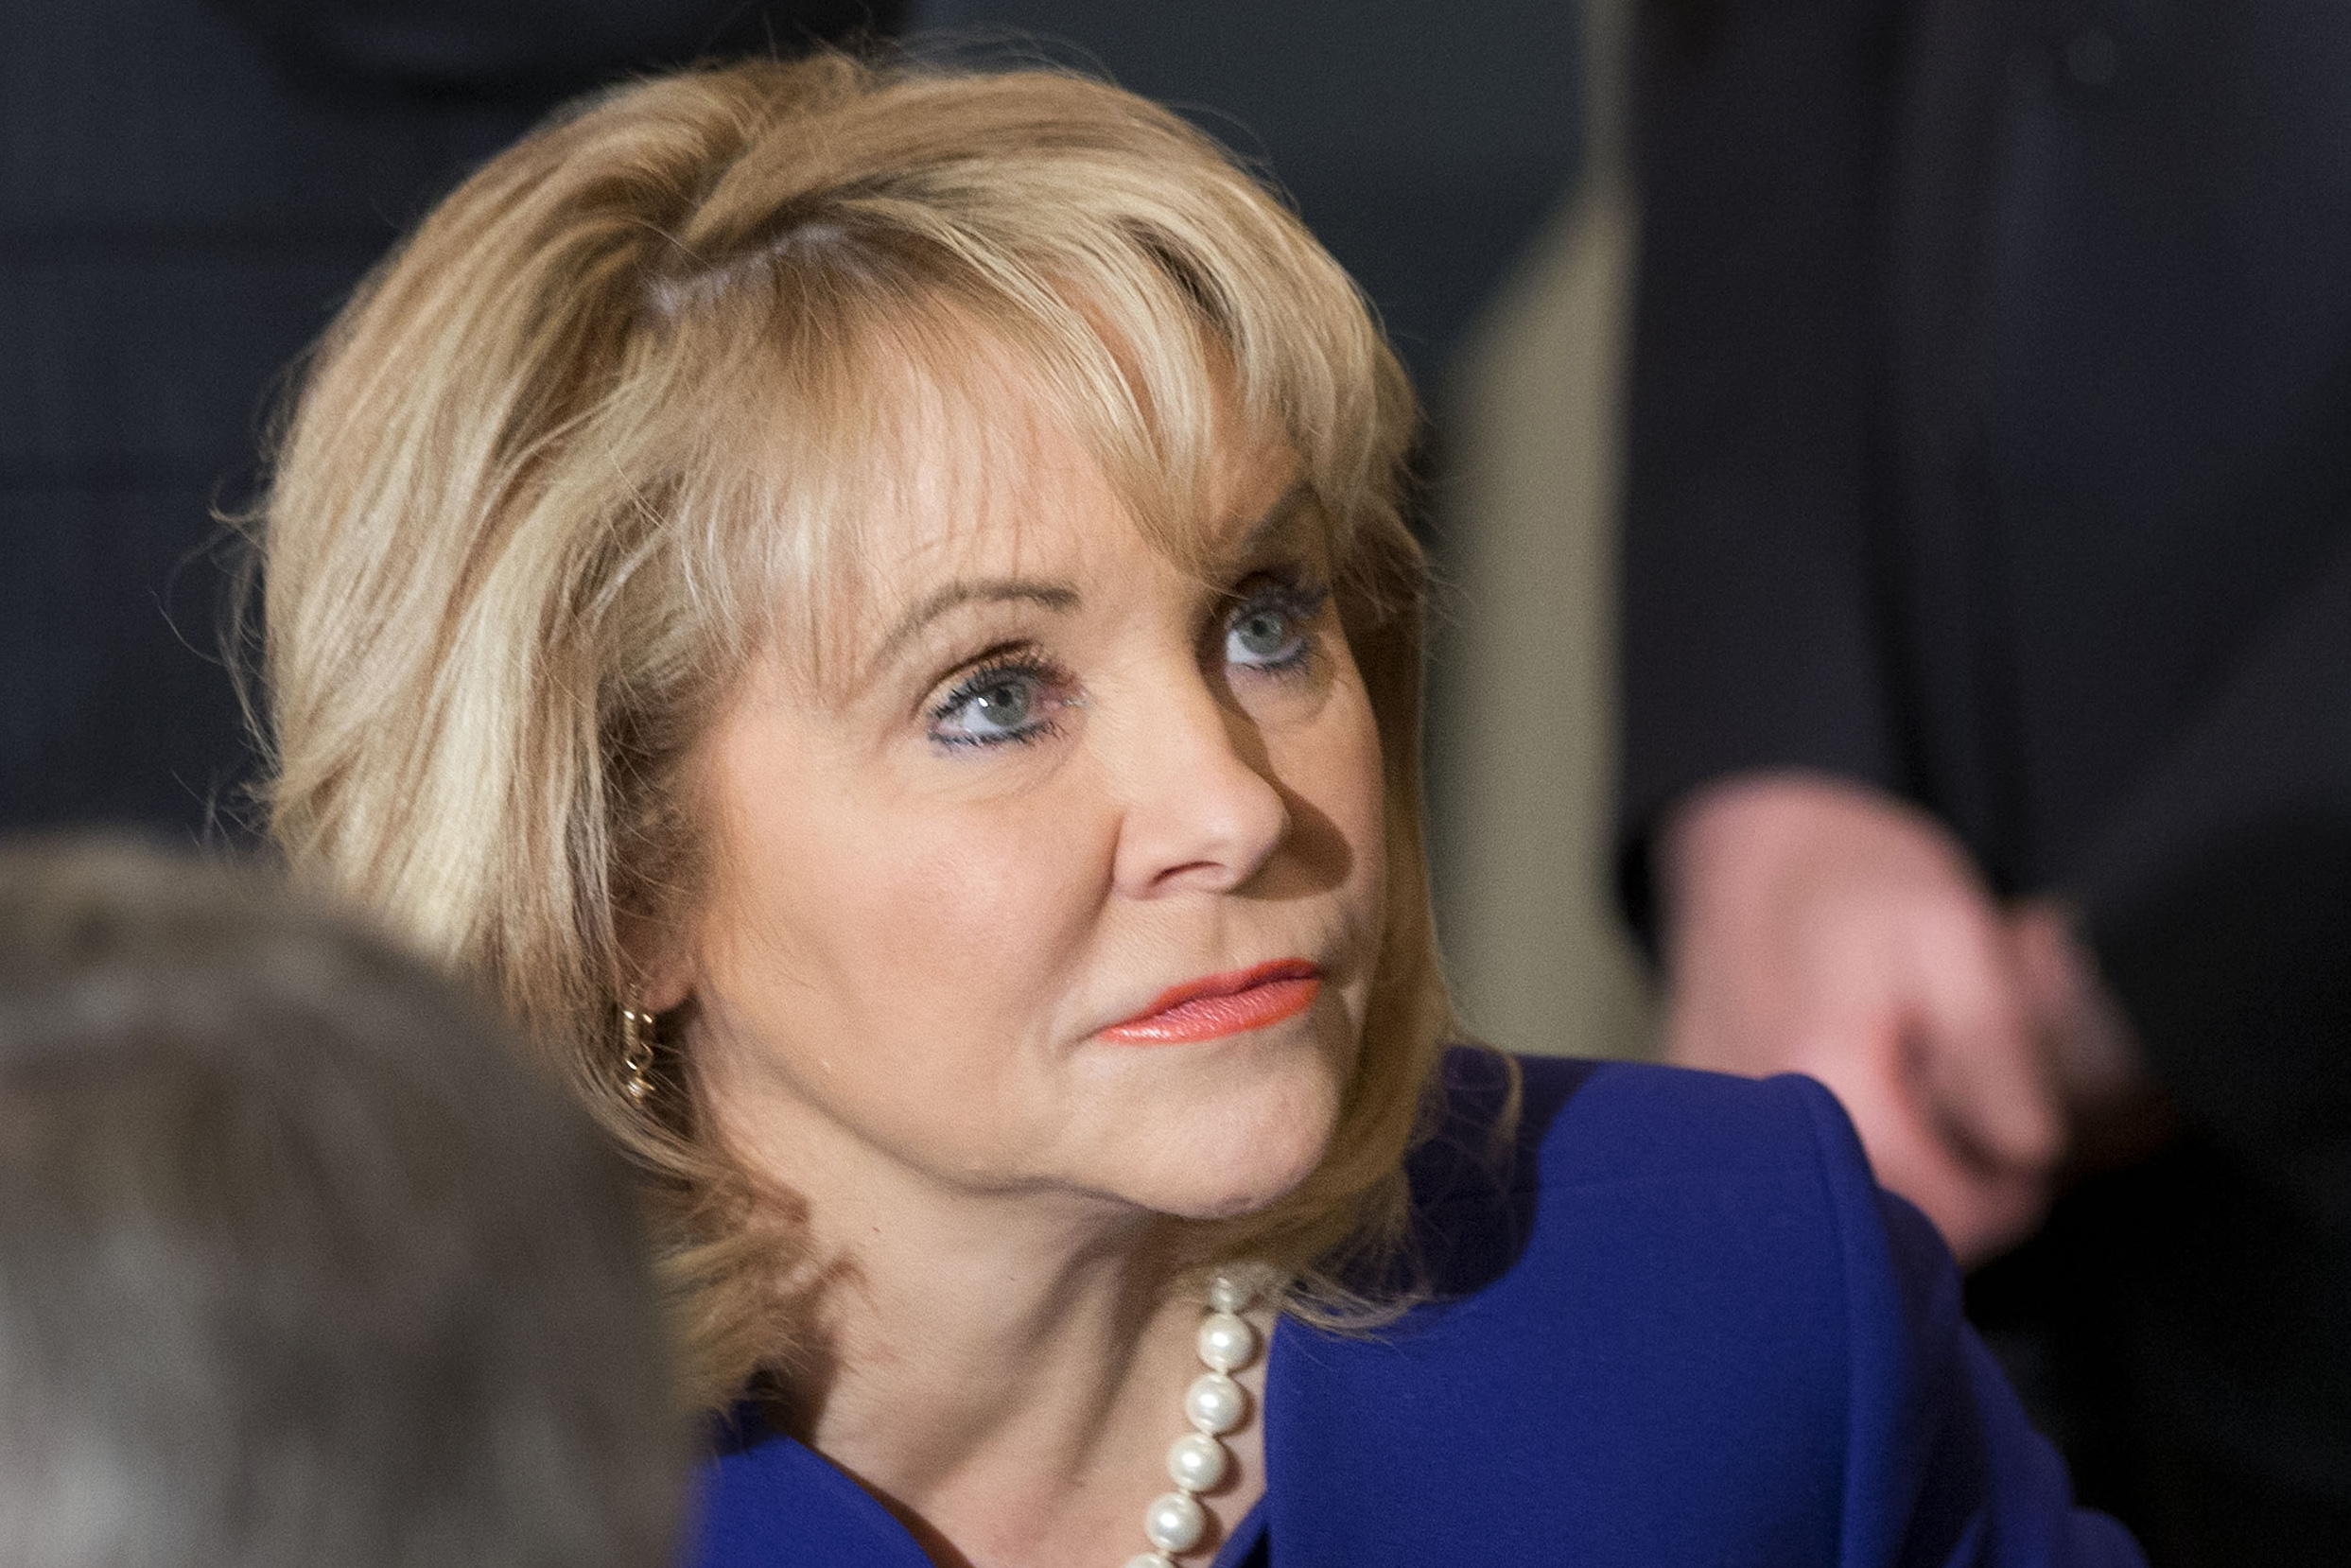 Oklahoma Governor Mary Fallin, chair of the National Governors Association, waits for the arrival of President Barack Obama to speak to members of the National Governors Association at the White House on Feb. 24, 2014 (Jacquelyn Martin—AP)